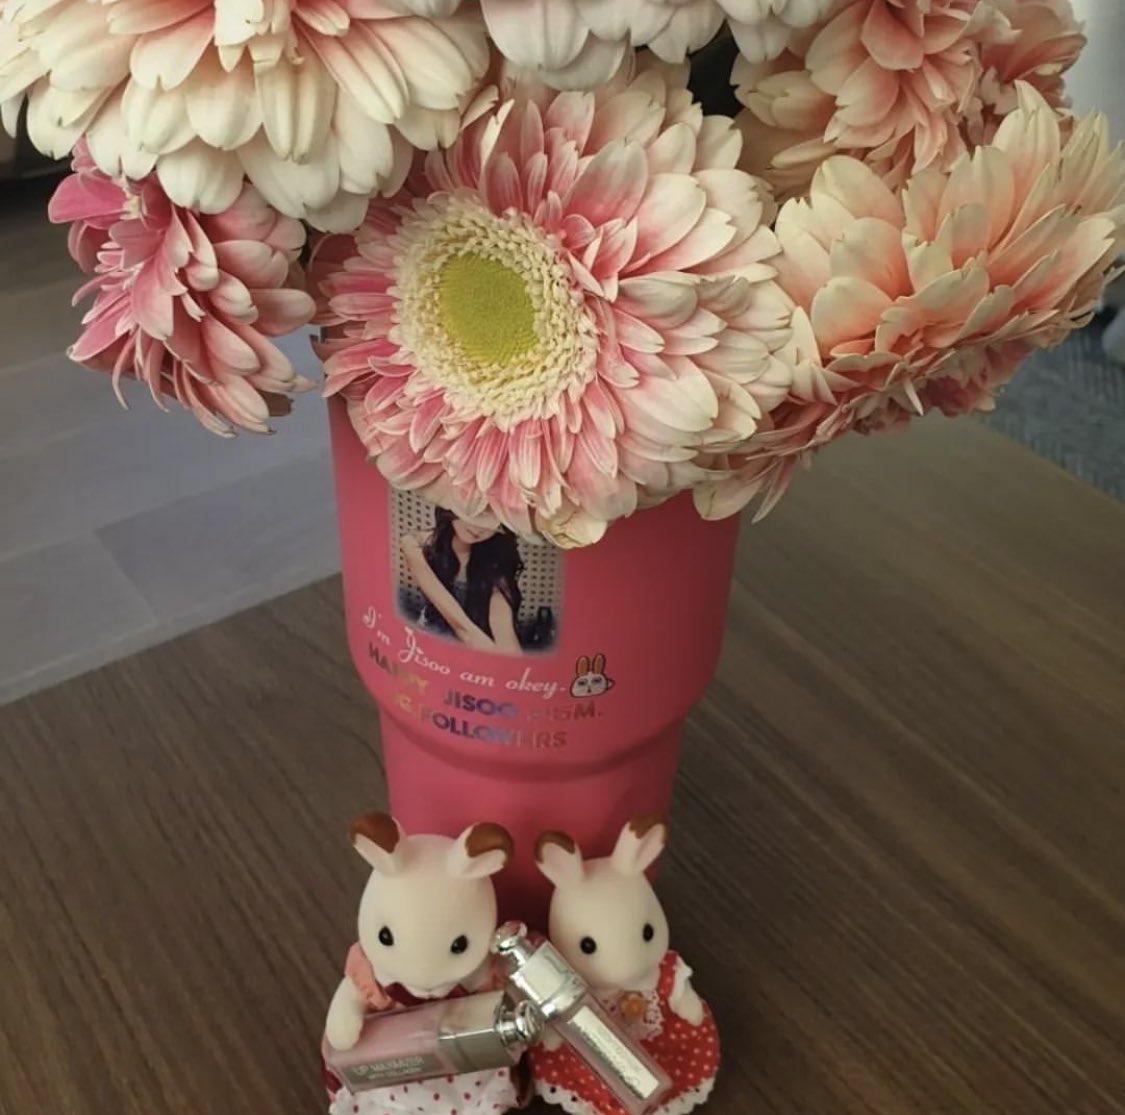 I can’t with Jisoo’s aunt flower vase😭